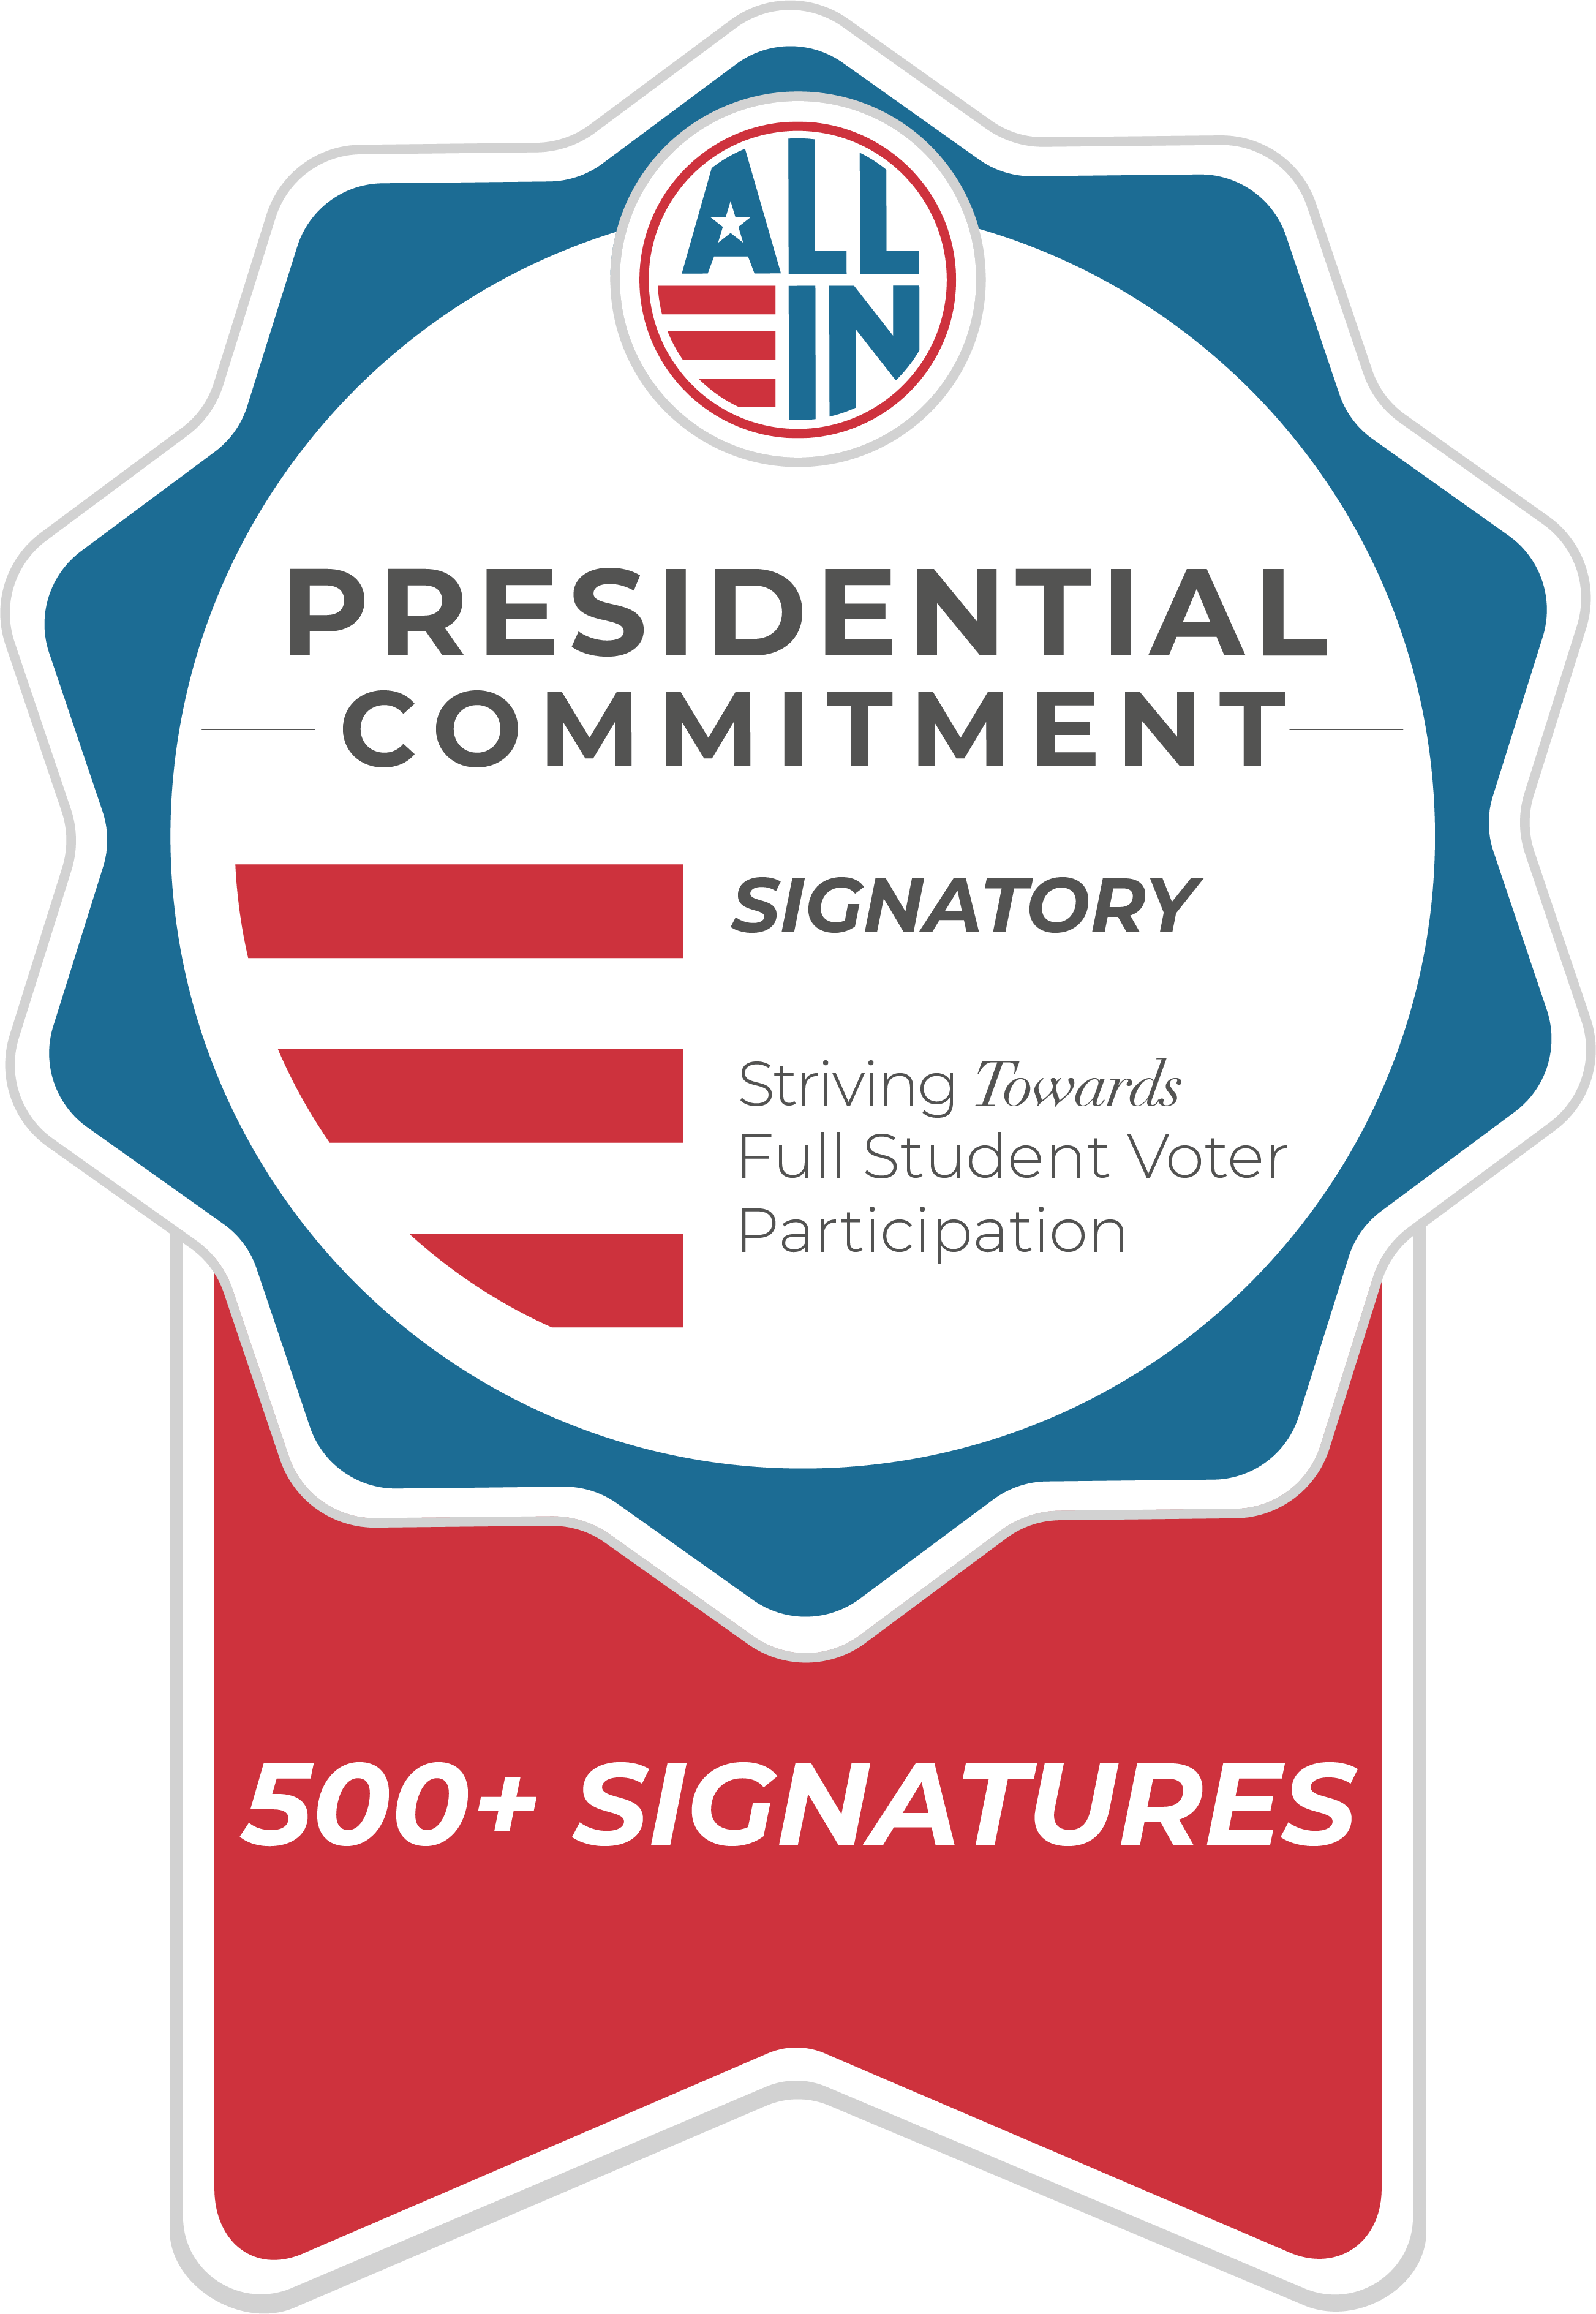 Presidential Commitment Signatory 